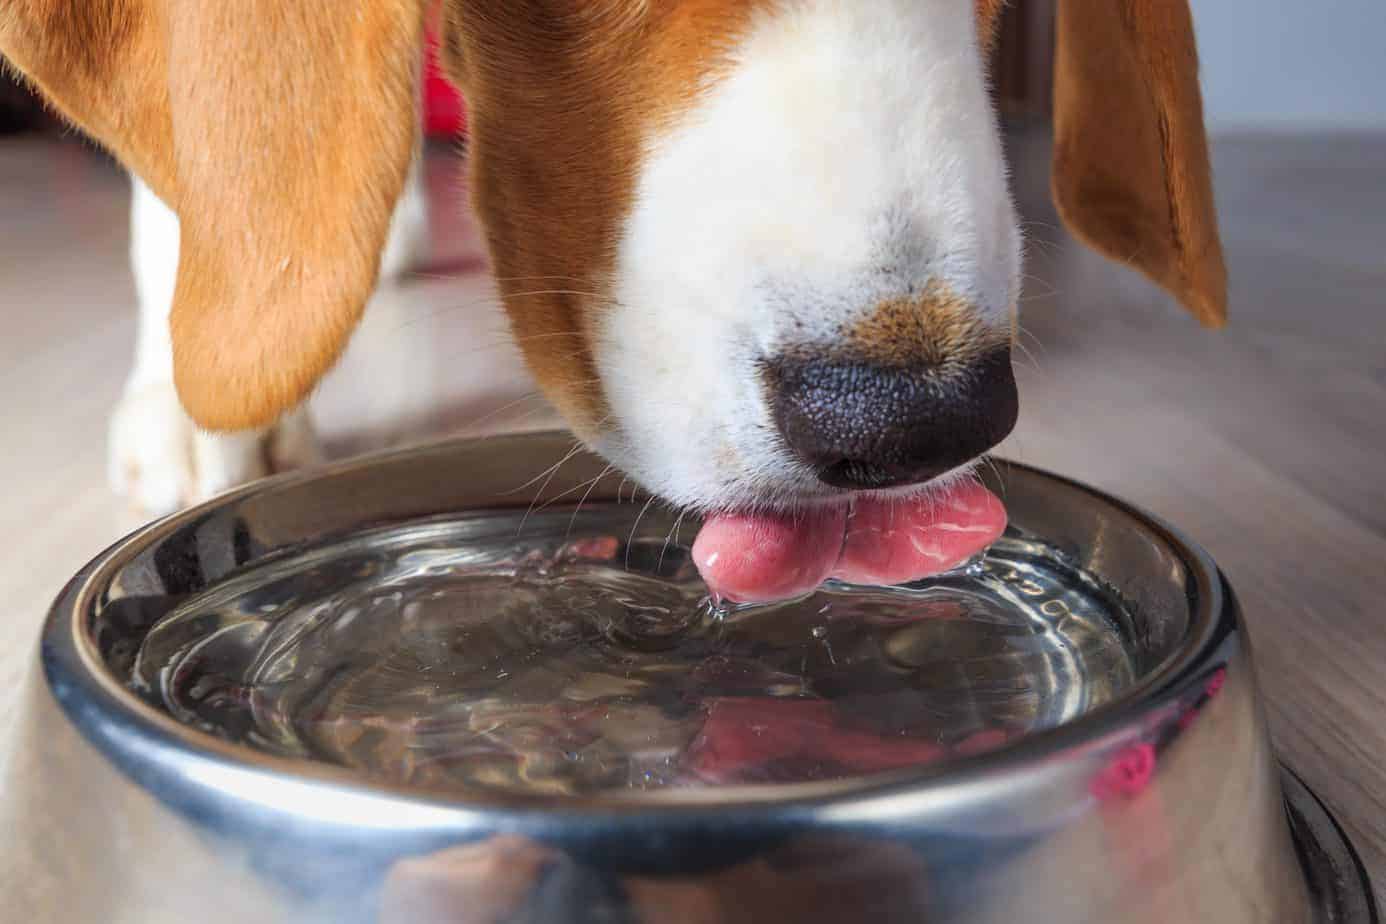 Beagle drinks fresh water. When it comes to pampering your pooch, most people focus on food. However, the water quality of what you give your dog is equally as important.